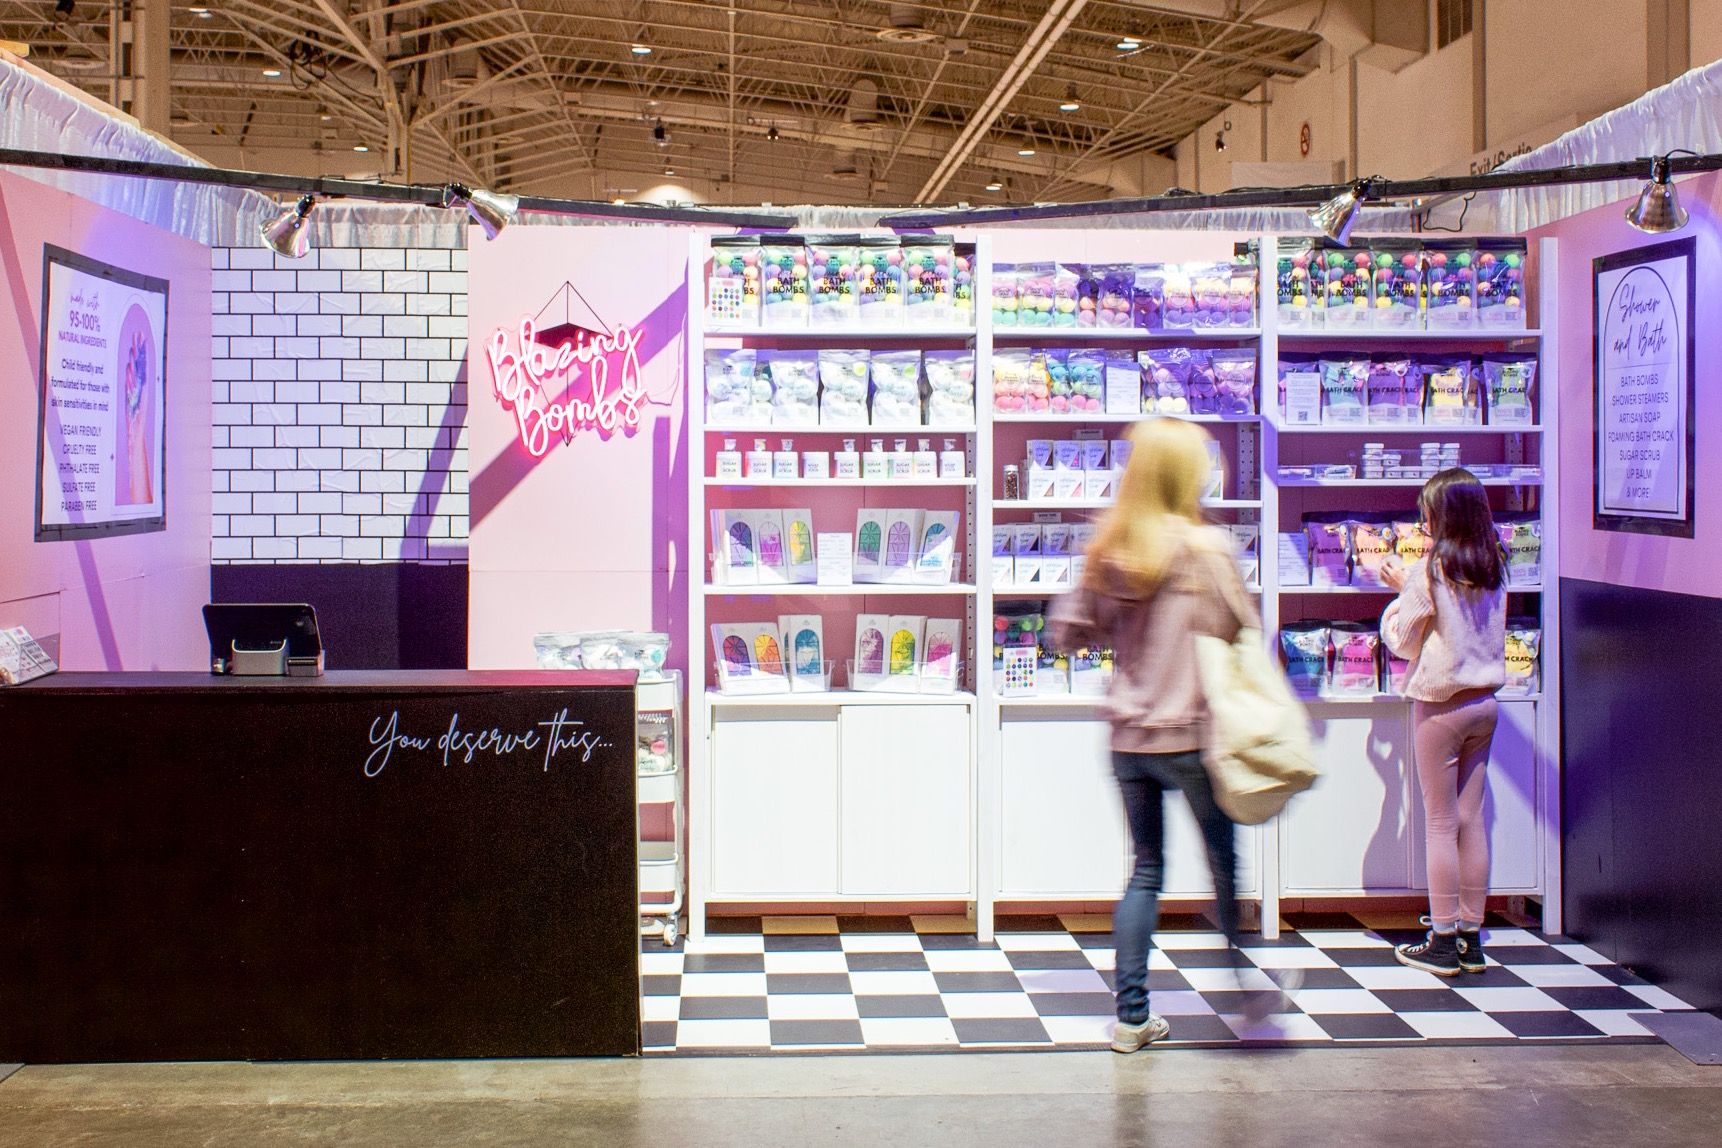 7 Show Booths That Caught Our Eye at OOAK, Plus 5 Award-Winning Designs